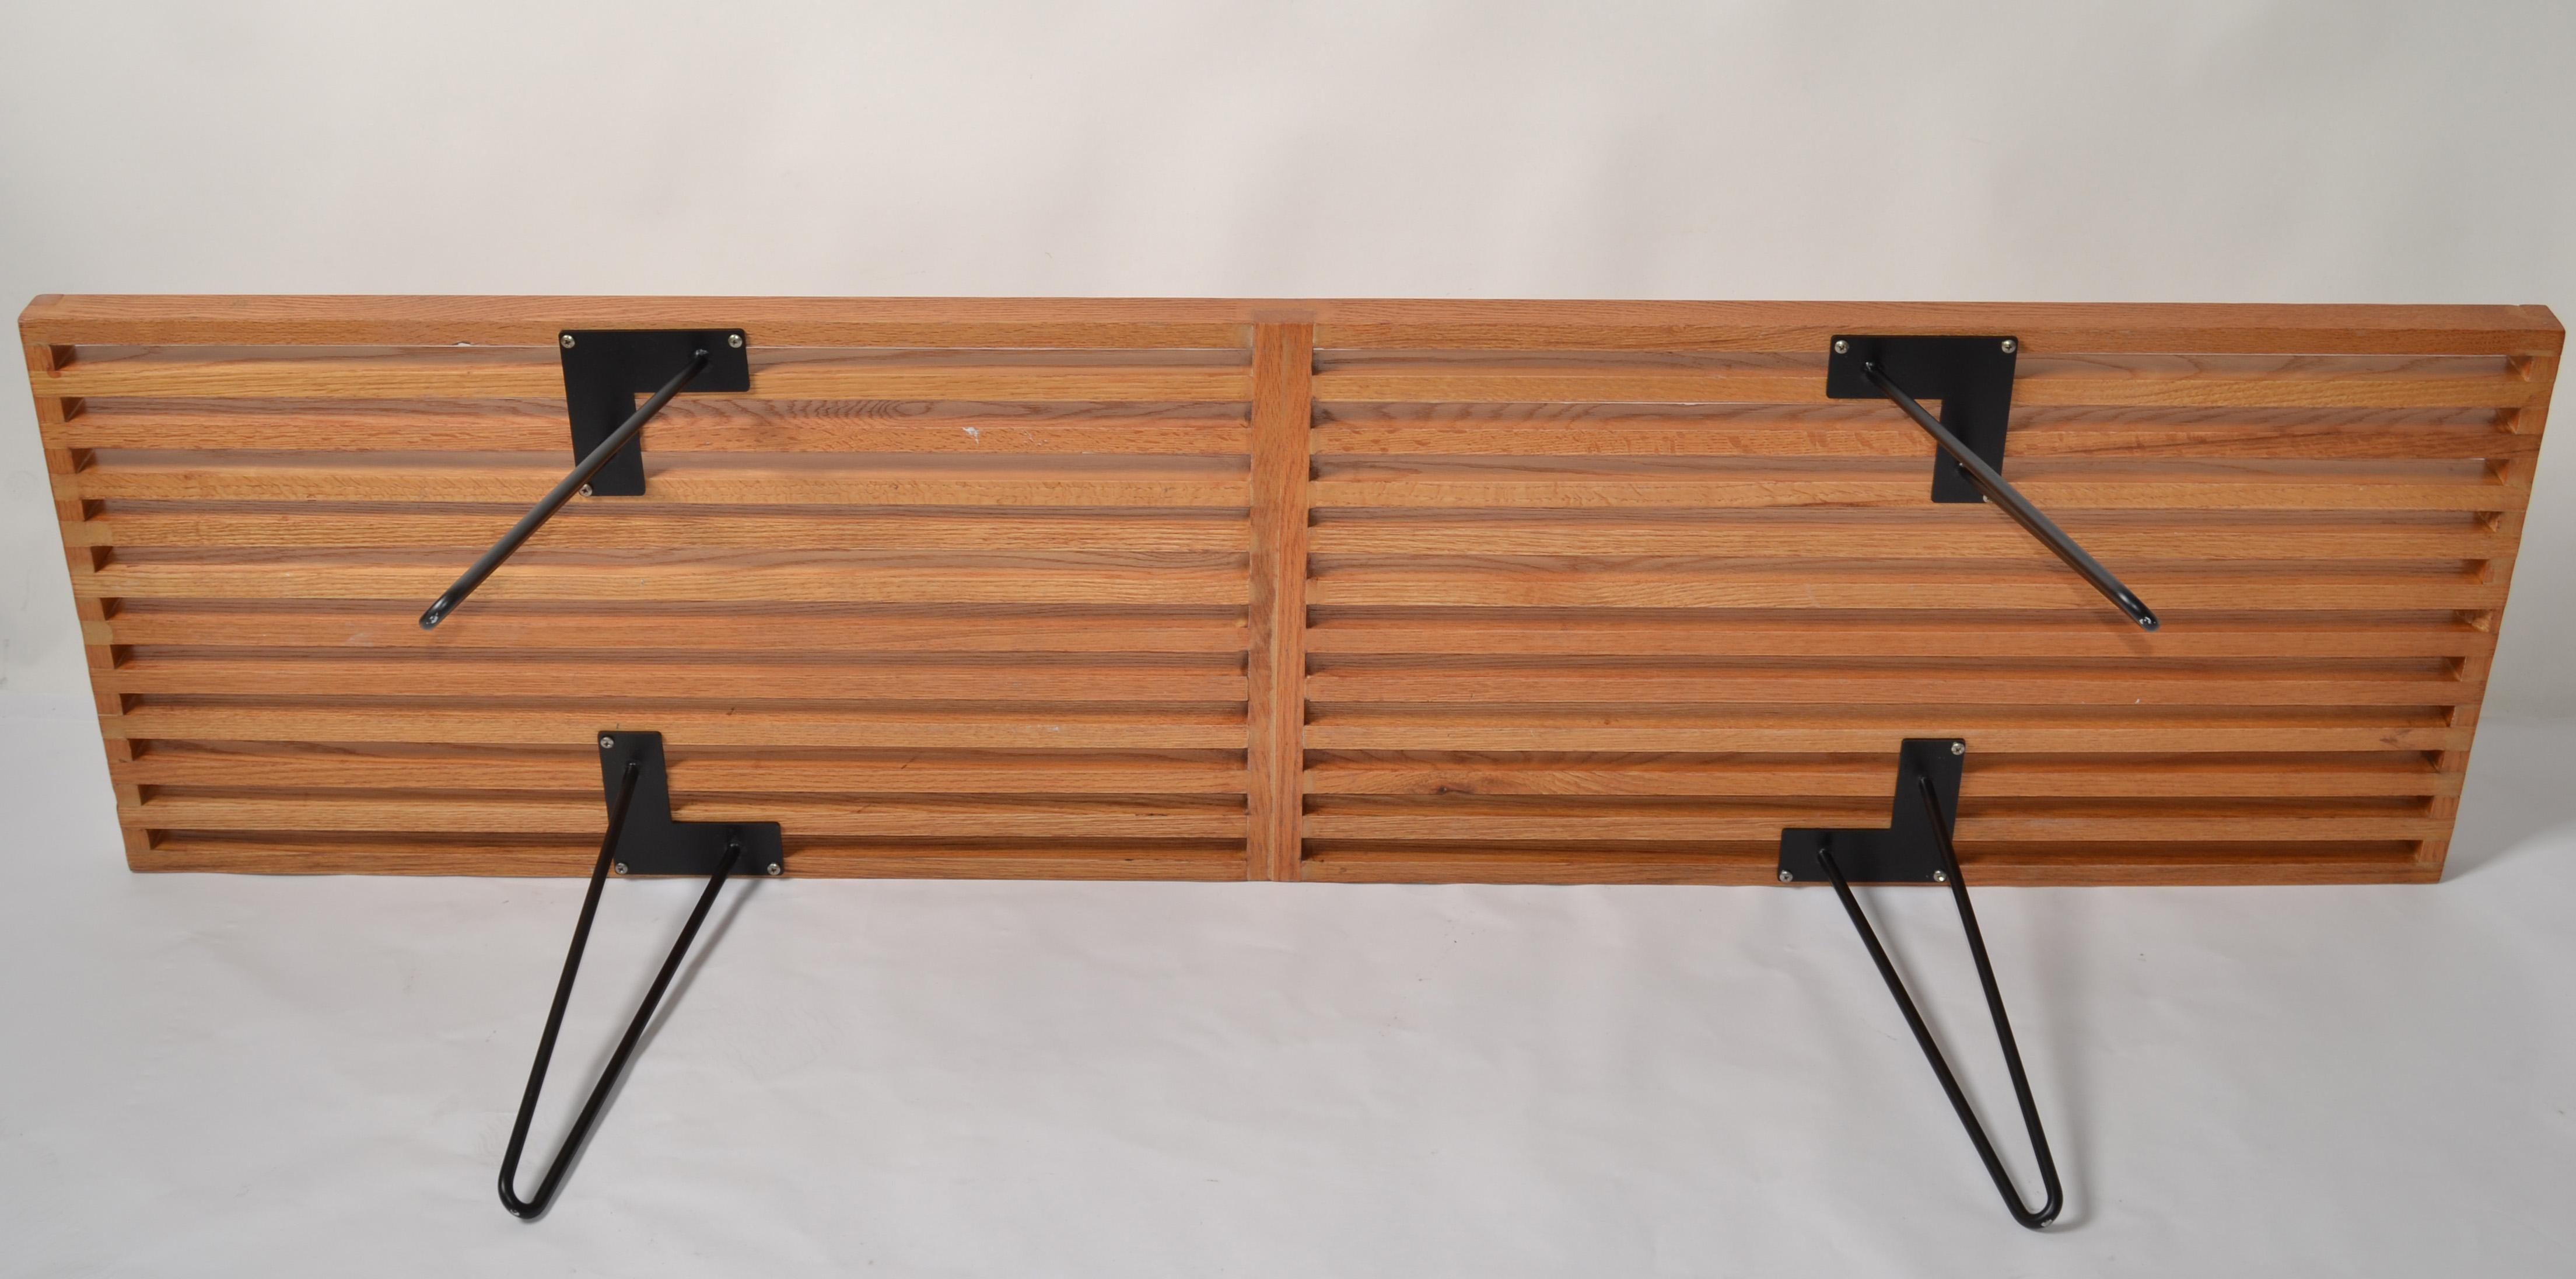 George Nelson Style Oak Slat Bench With Steel Hairpin Legs Attributed to Knoll For Sale 5